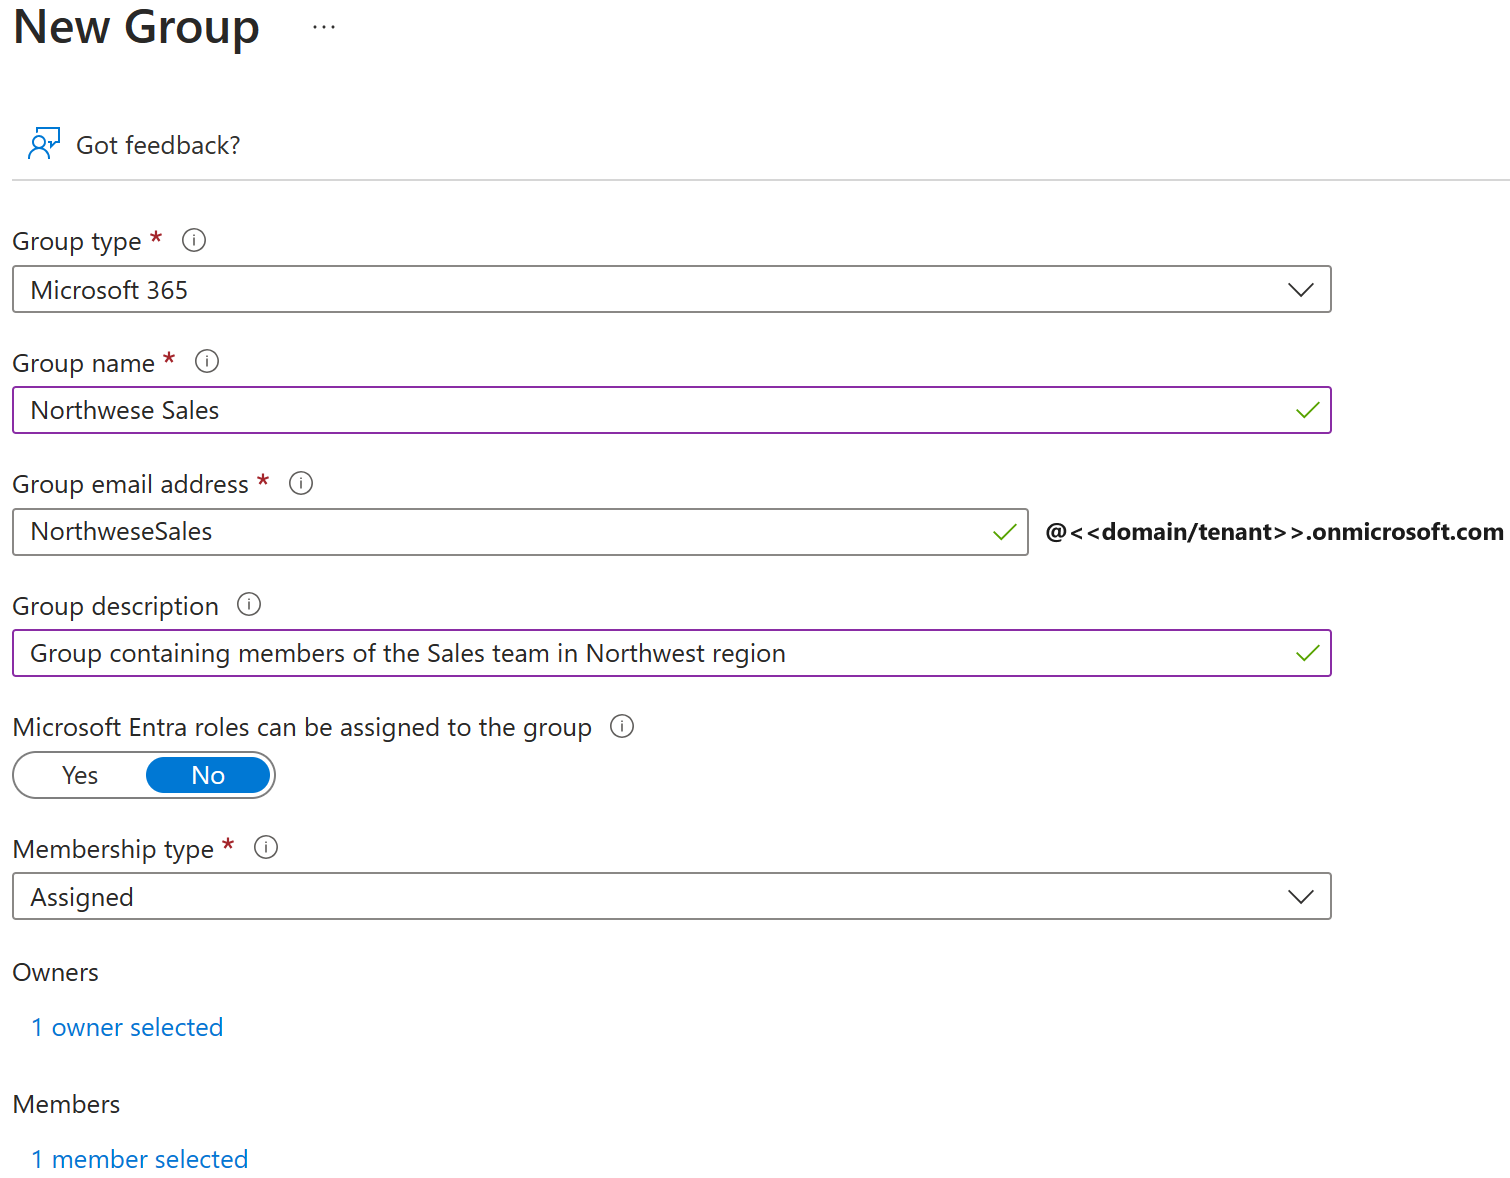 Screenshot of the New Group page with Group type, Group name, Owners, and Members highlighted. When you create a new group you have to set these values.